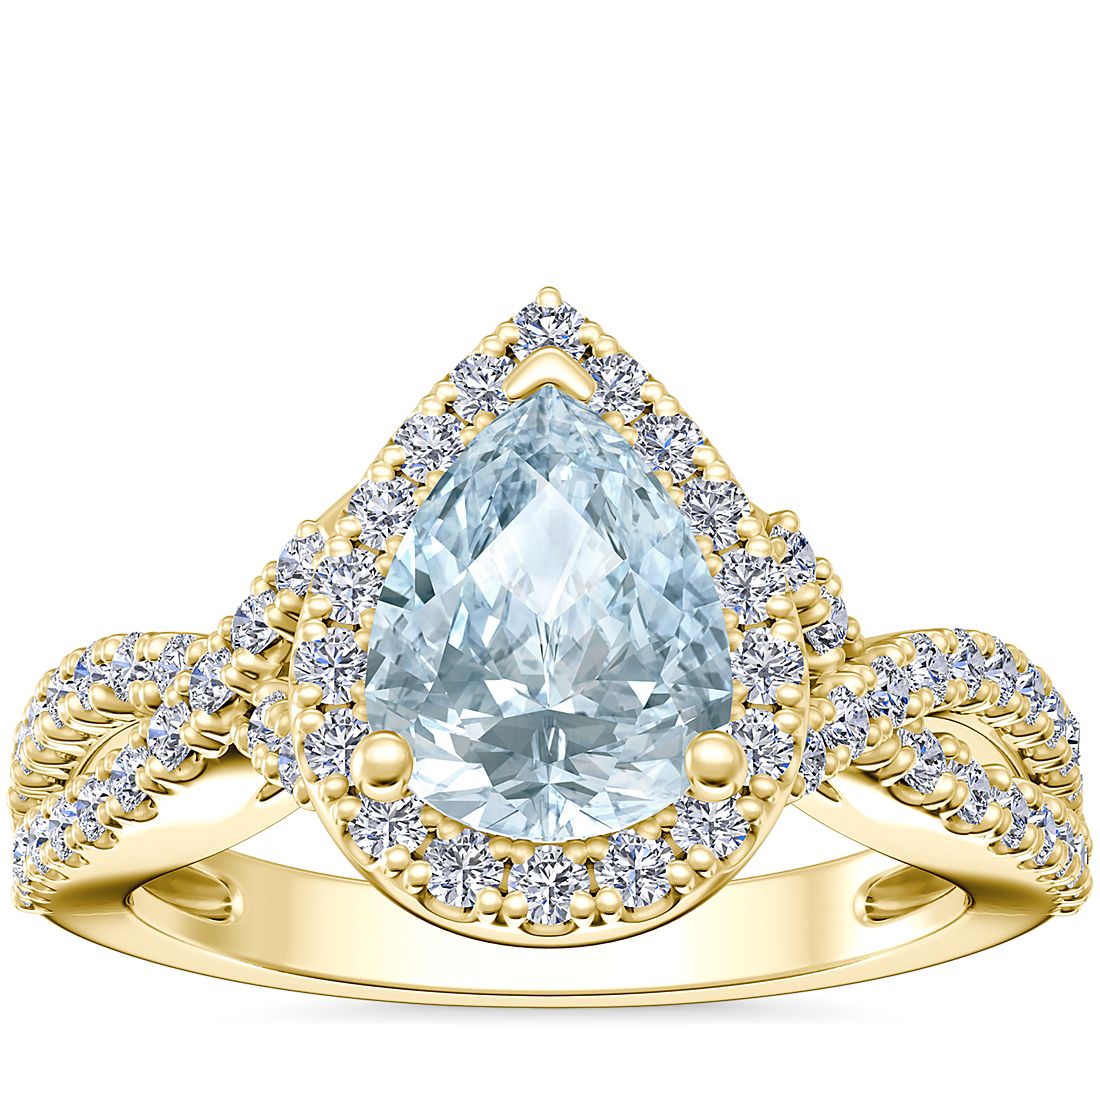 Twist Halo Diamond Engagement Ring with Pear-Shaped Aquamarine in 14k Yellow Gold (8x6mm)